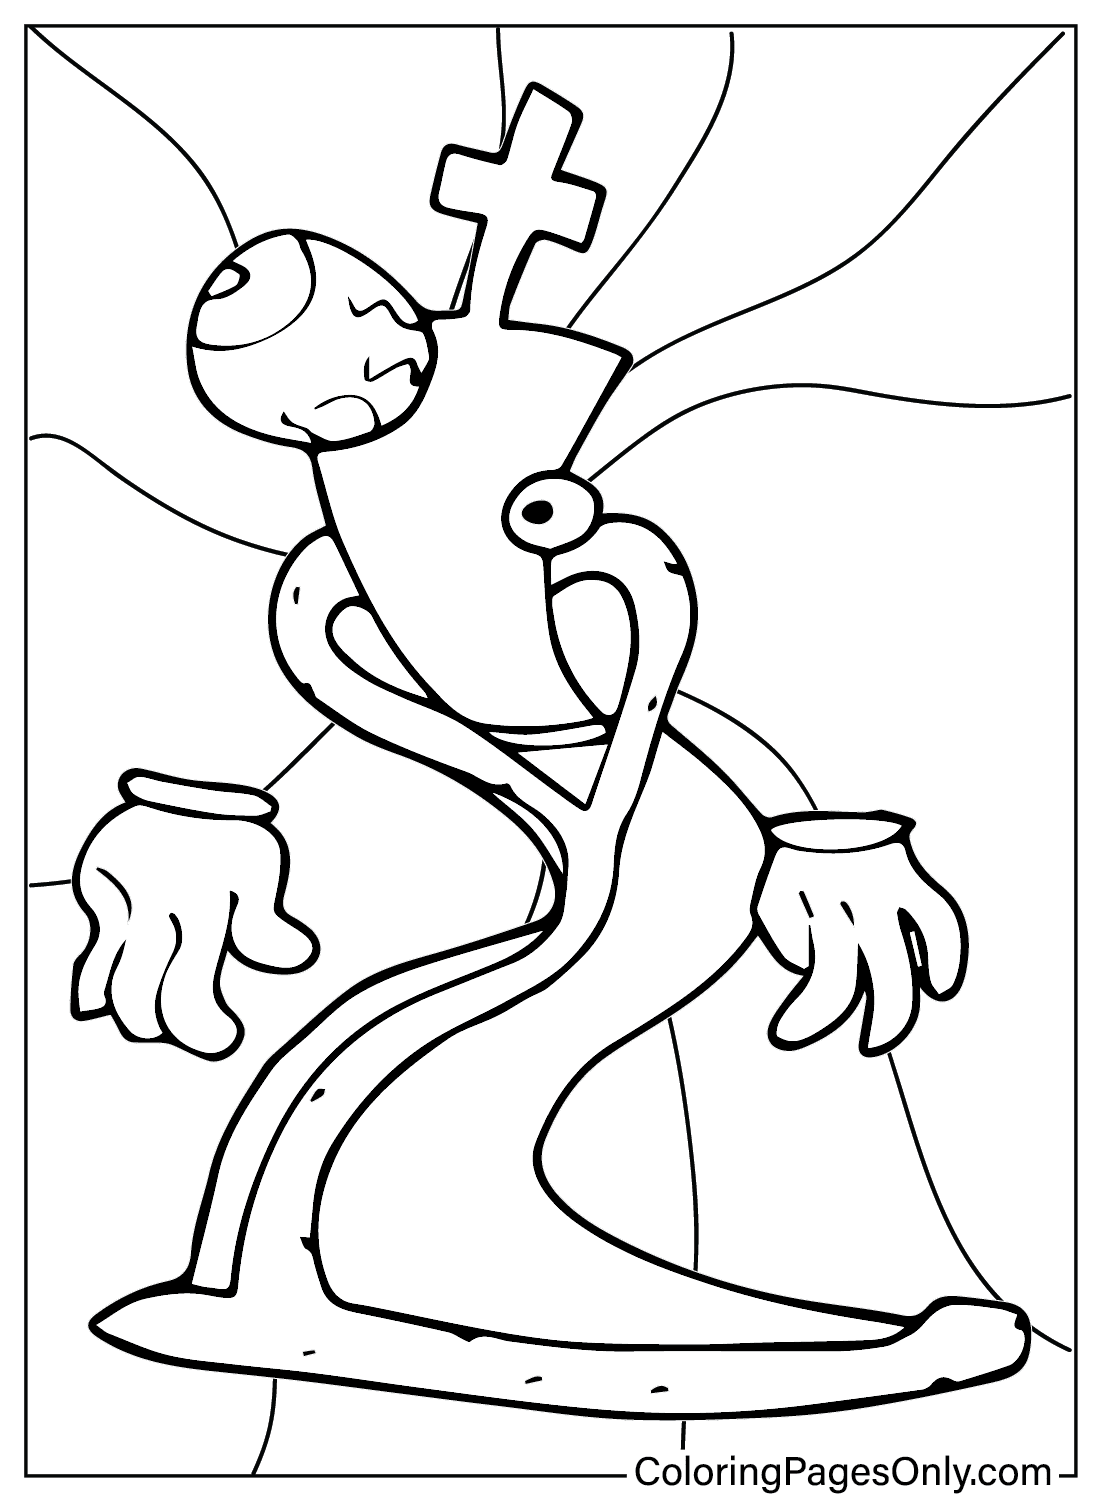 Kinger Coloring Page Free - Free Printable Coloring Pages